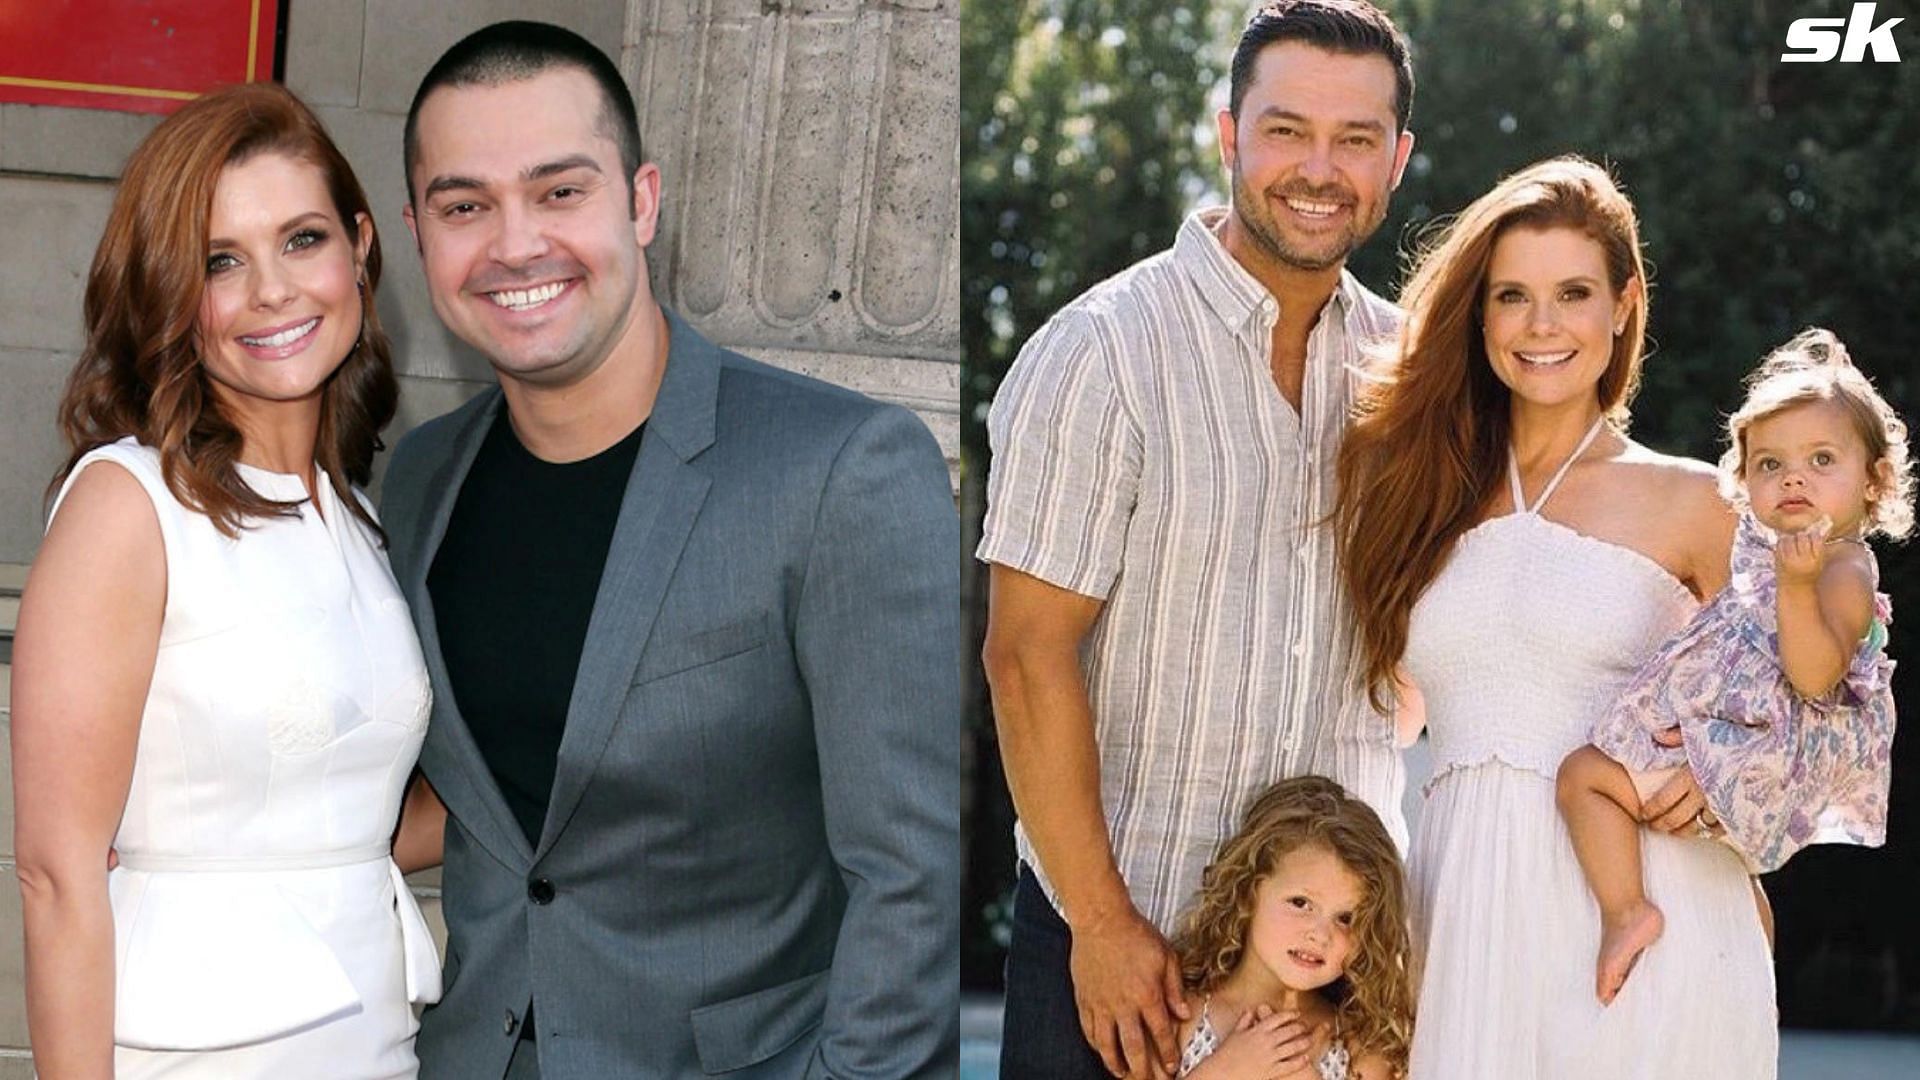 Nick Swisher: Hollywood actress JoAnna Garcia once revealed the